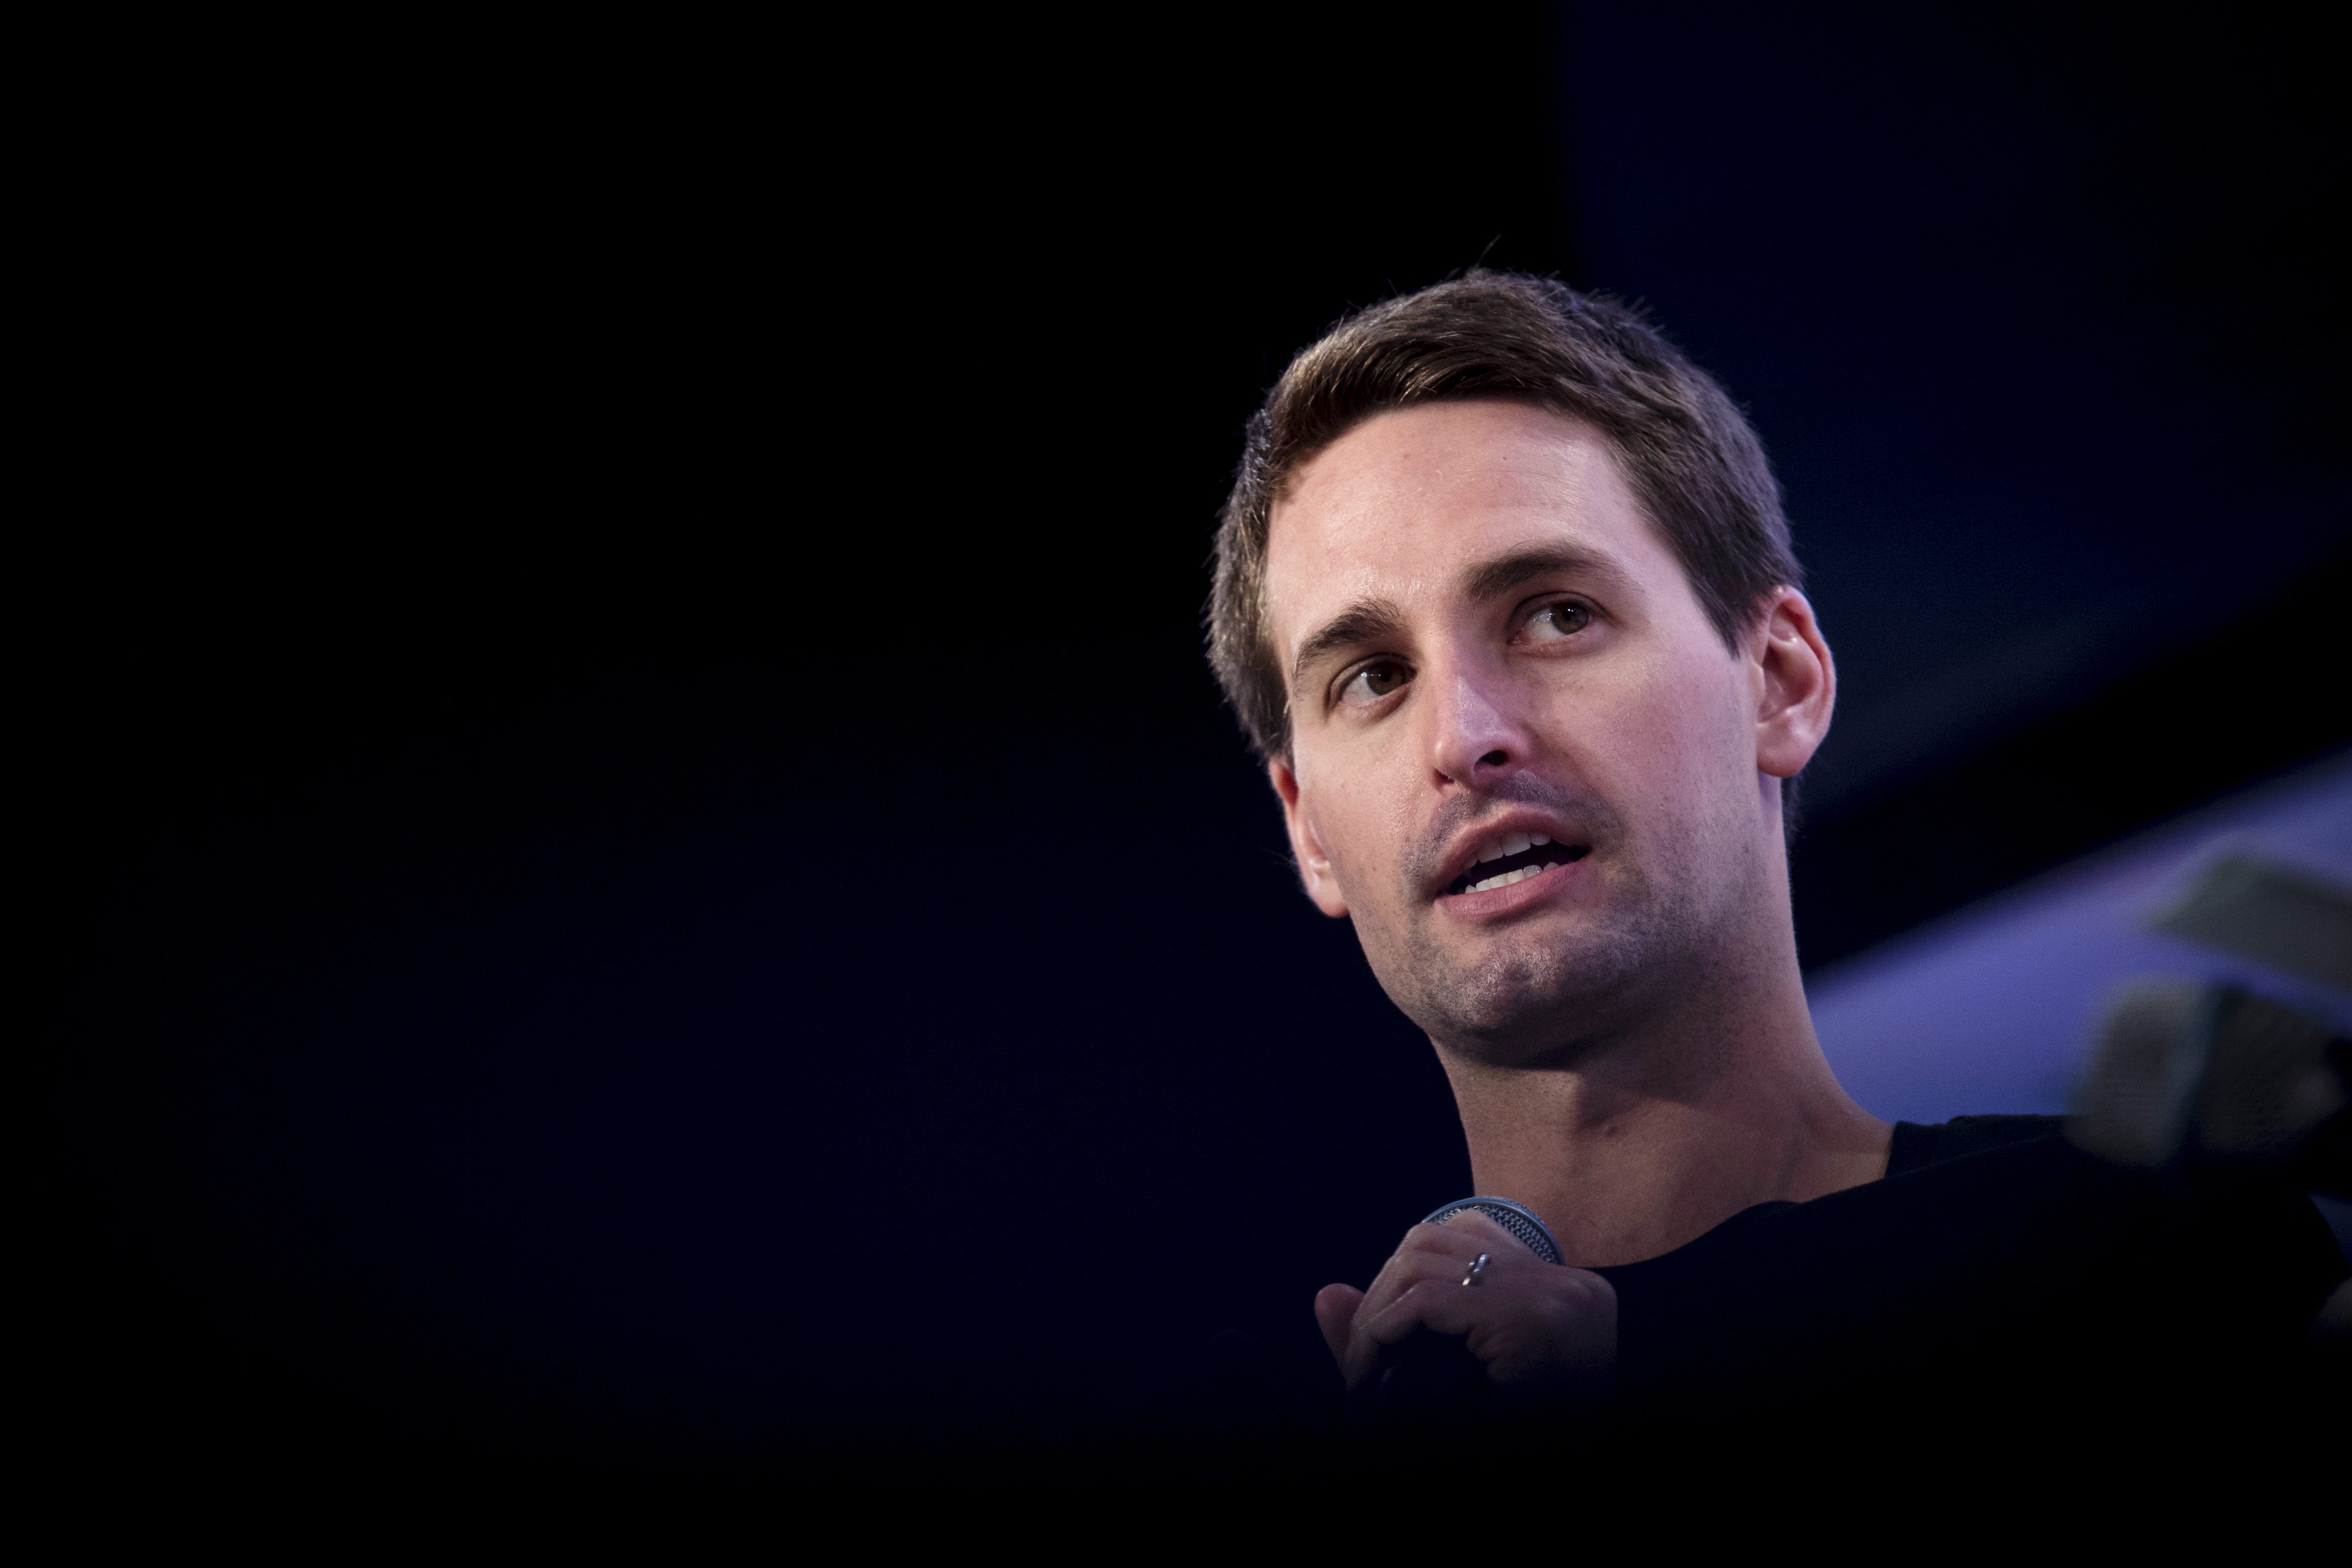 Evan Spiegel on the Call for Regulation - The New York Times